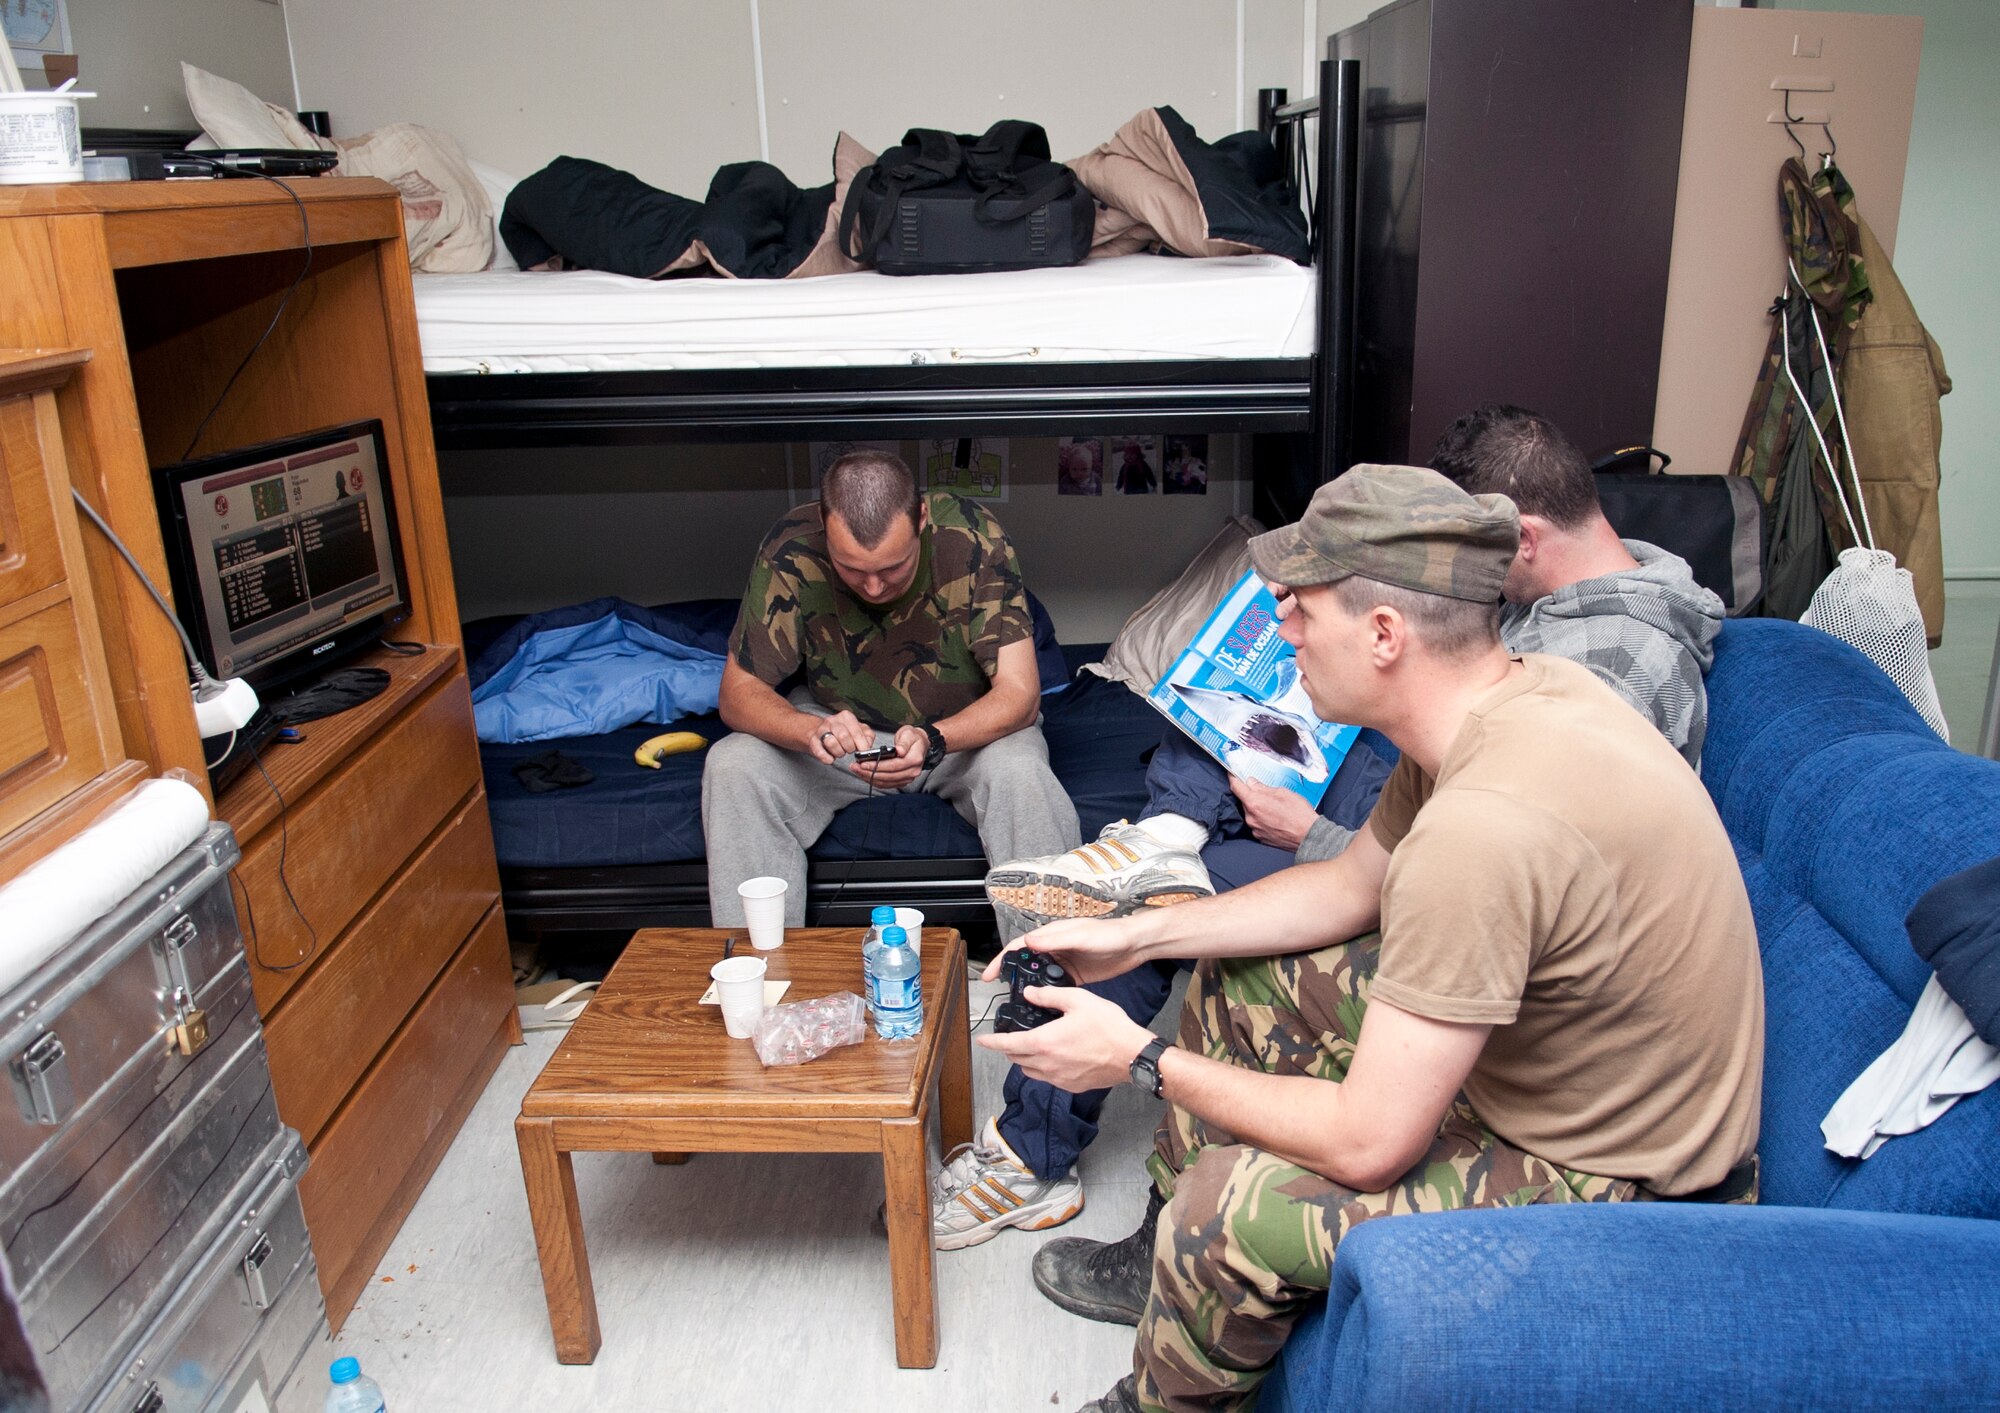 Dutch army soldiers relax during their off time in their room in Patriot Village Feb. 22, 2013, at Incirlik Air Base, Turkey. Patriot Village is Incirlik's contingency lodging facility capable of housing more than 1,200 people. (U.S. Air Force photo by Senior Airman Daniel Phelps/Released)